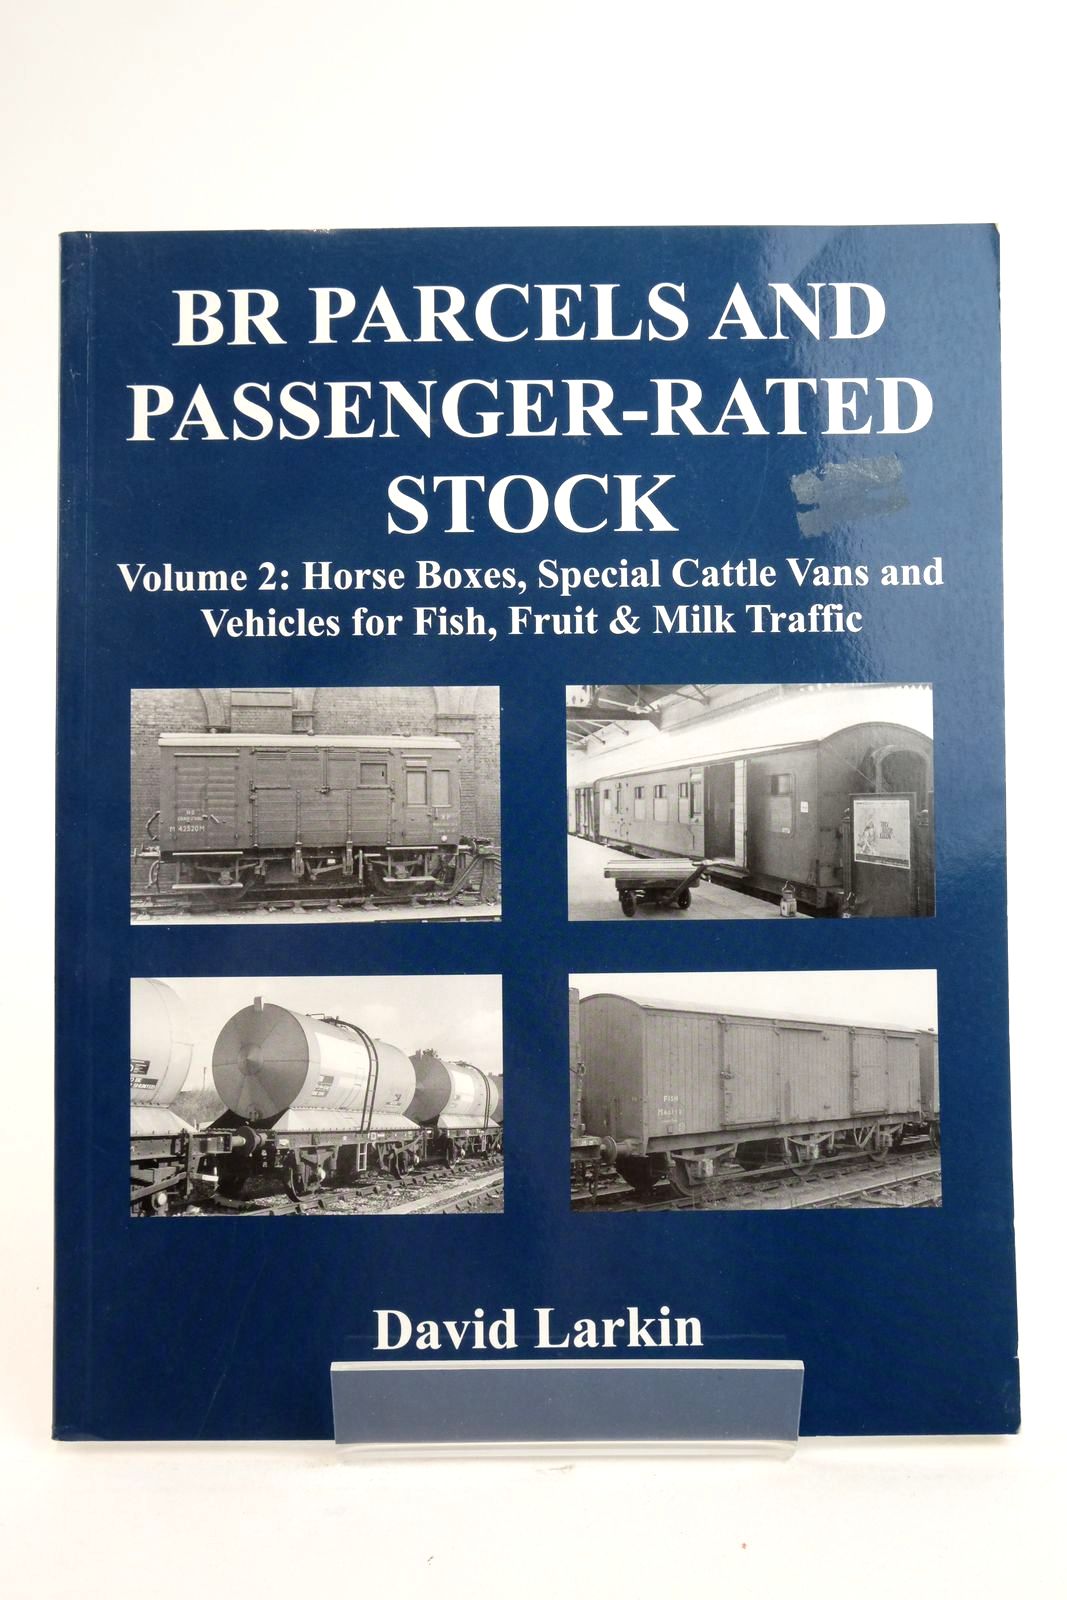 Photo of BR PARCELS AND PASSENGER-RATED STOCK VOLUME 2 written by Larkin, David published by Kestrel Railway Books (STOCK CODE: 2136352)  for sale by Stella & Rose's Books